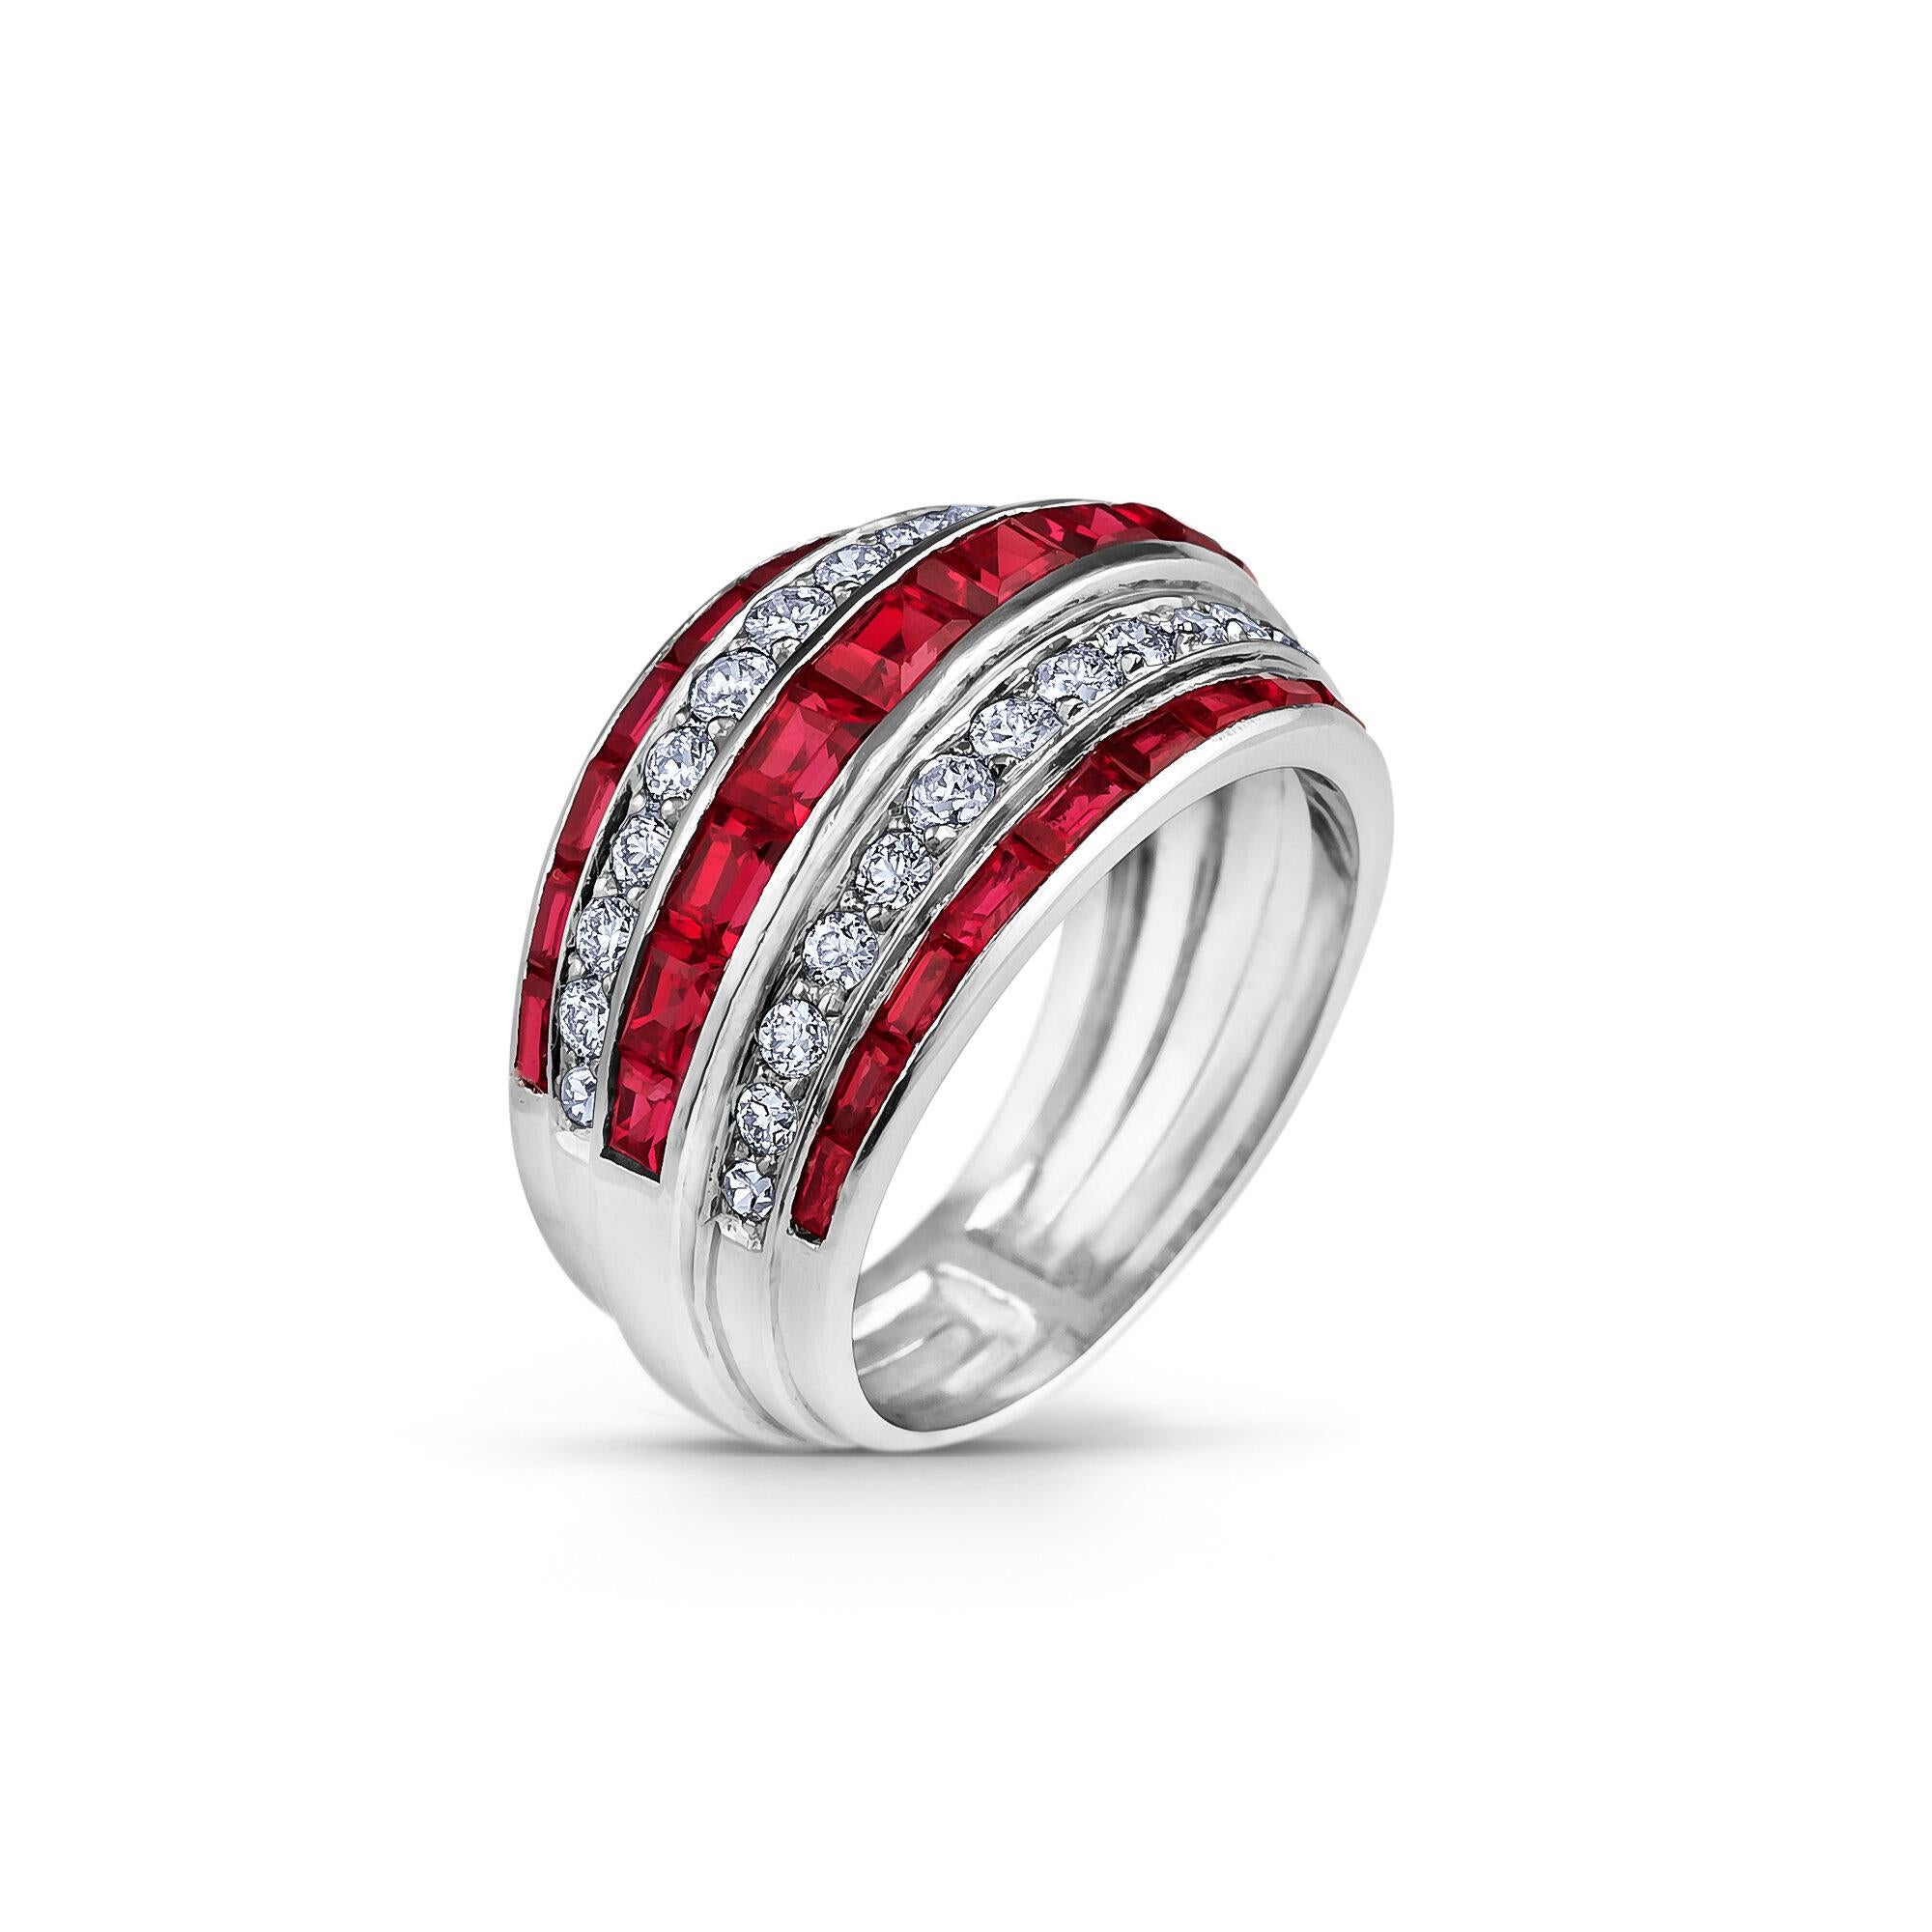 The power of red and white is 'stacked up' in this strong statement bombe ring.  With three rows of square cut luscious rubies alternating with two rows of mesmerizing diamonds, this jewel is designed to look like five separate rings stacked